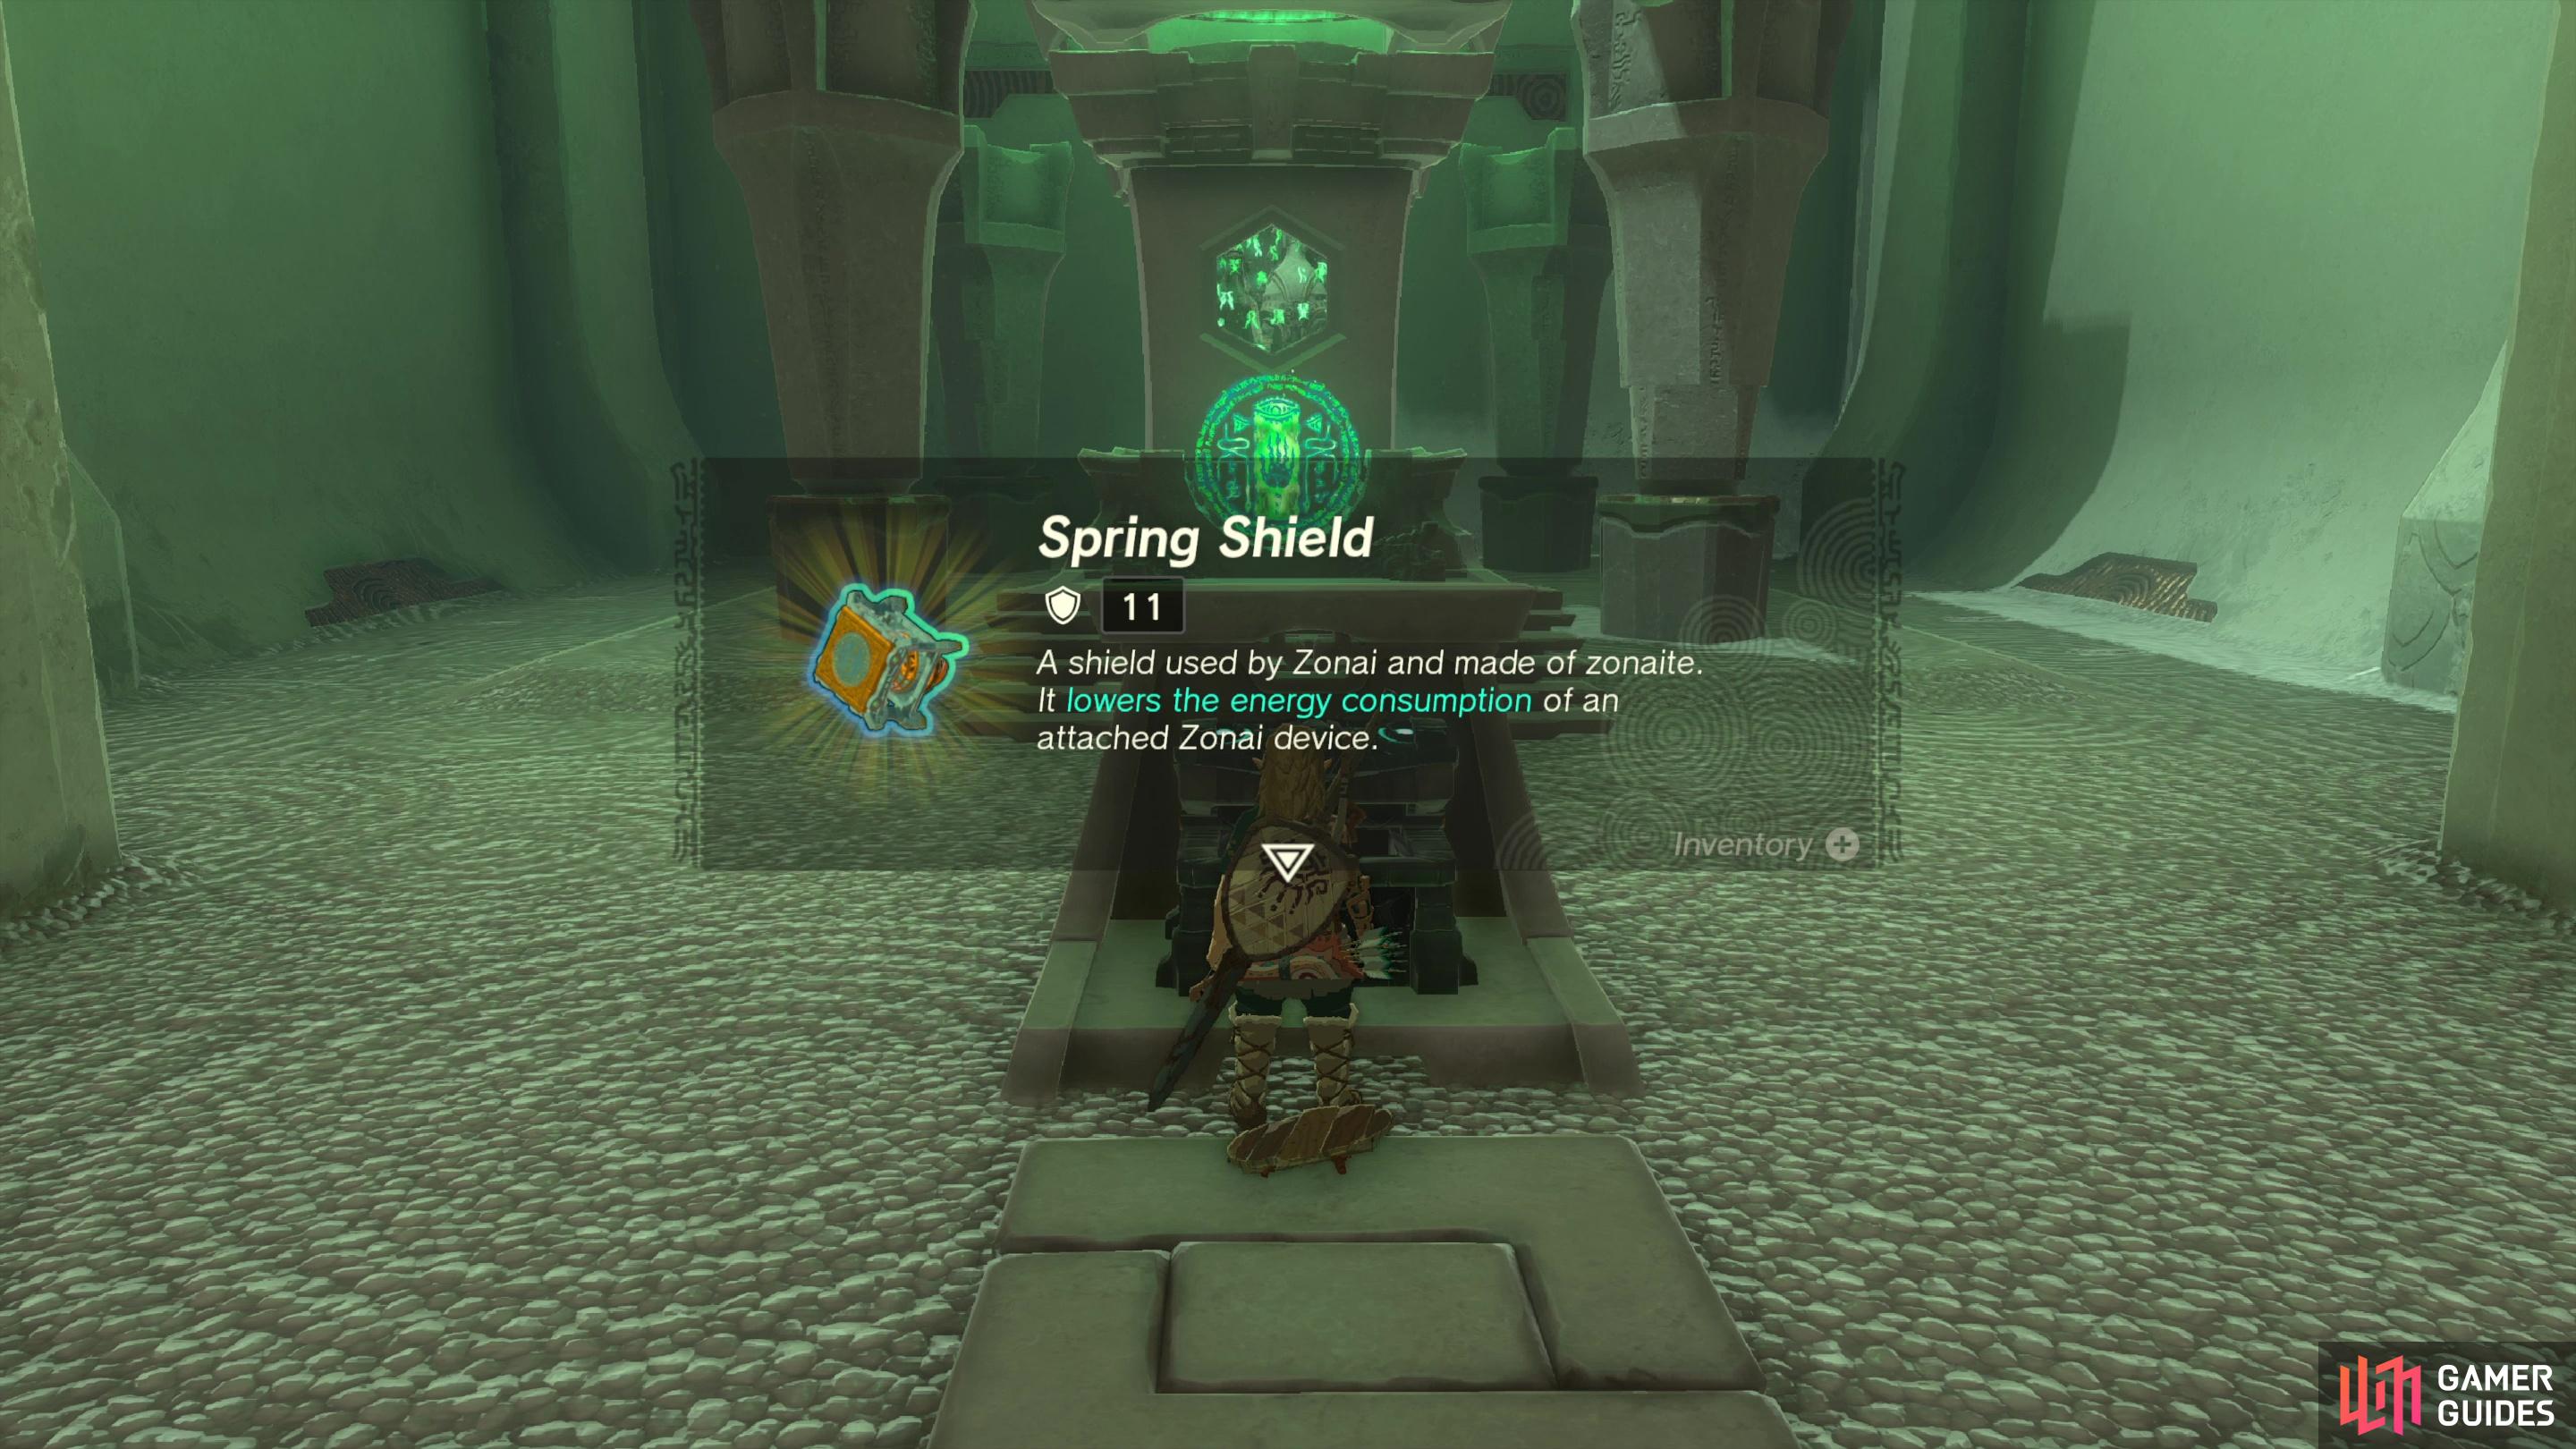 then continue to the end of the shrine to obtain the Spring Shield.